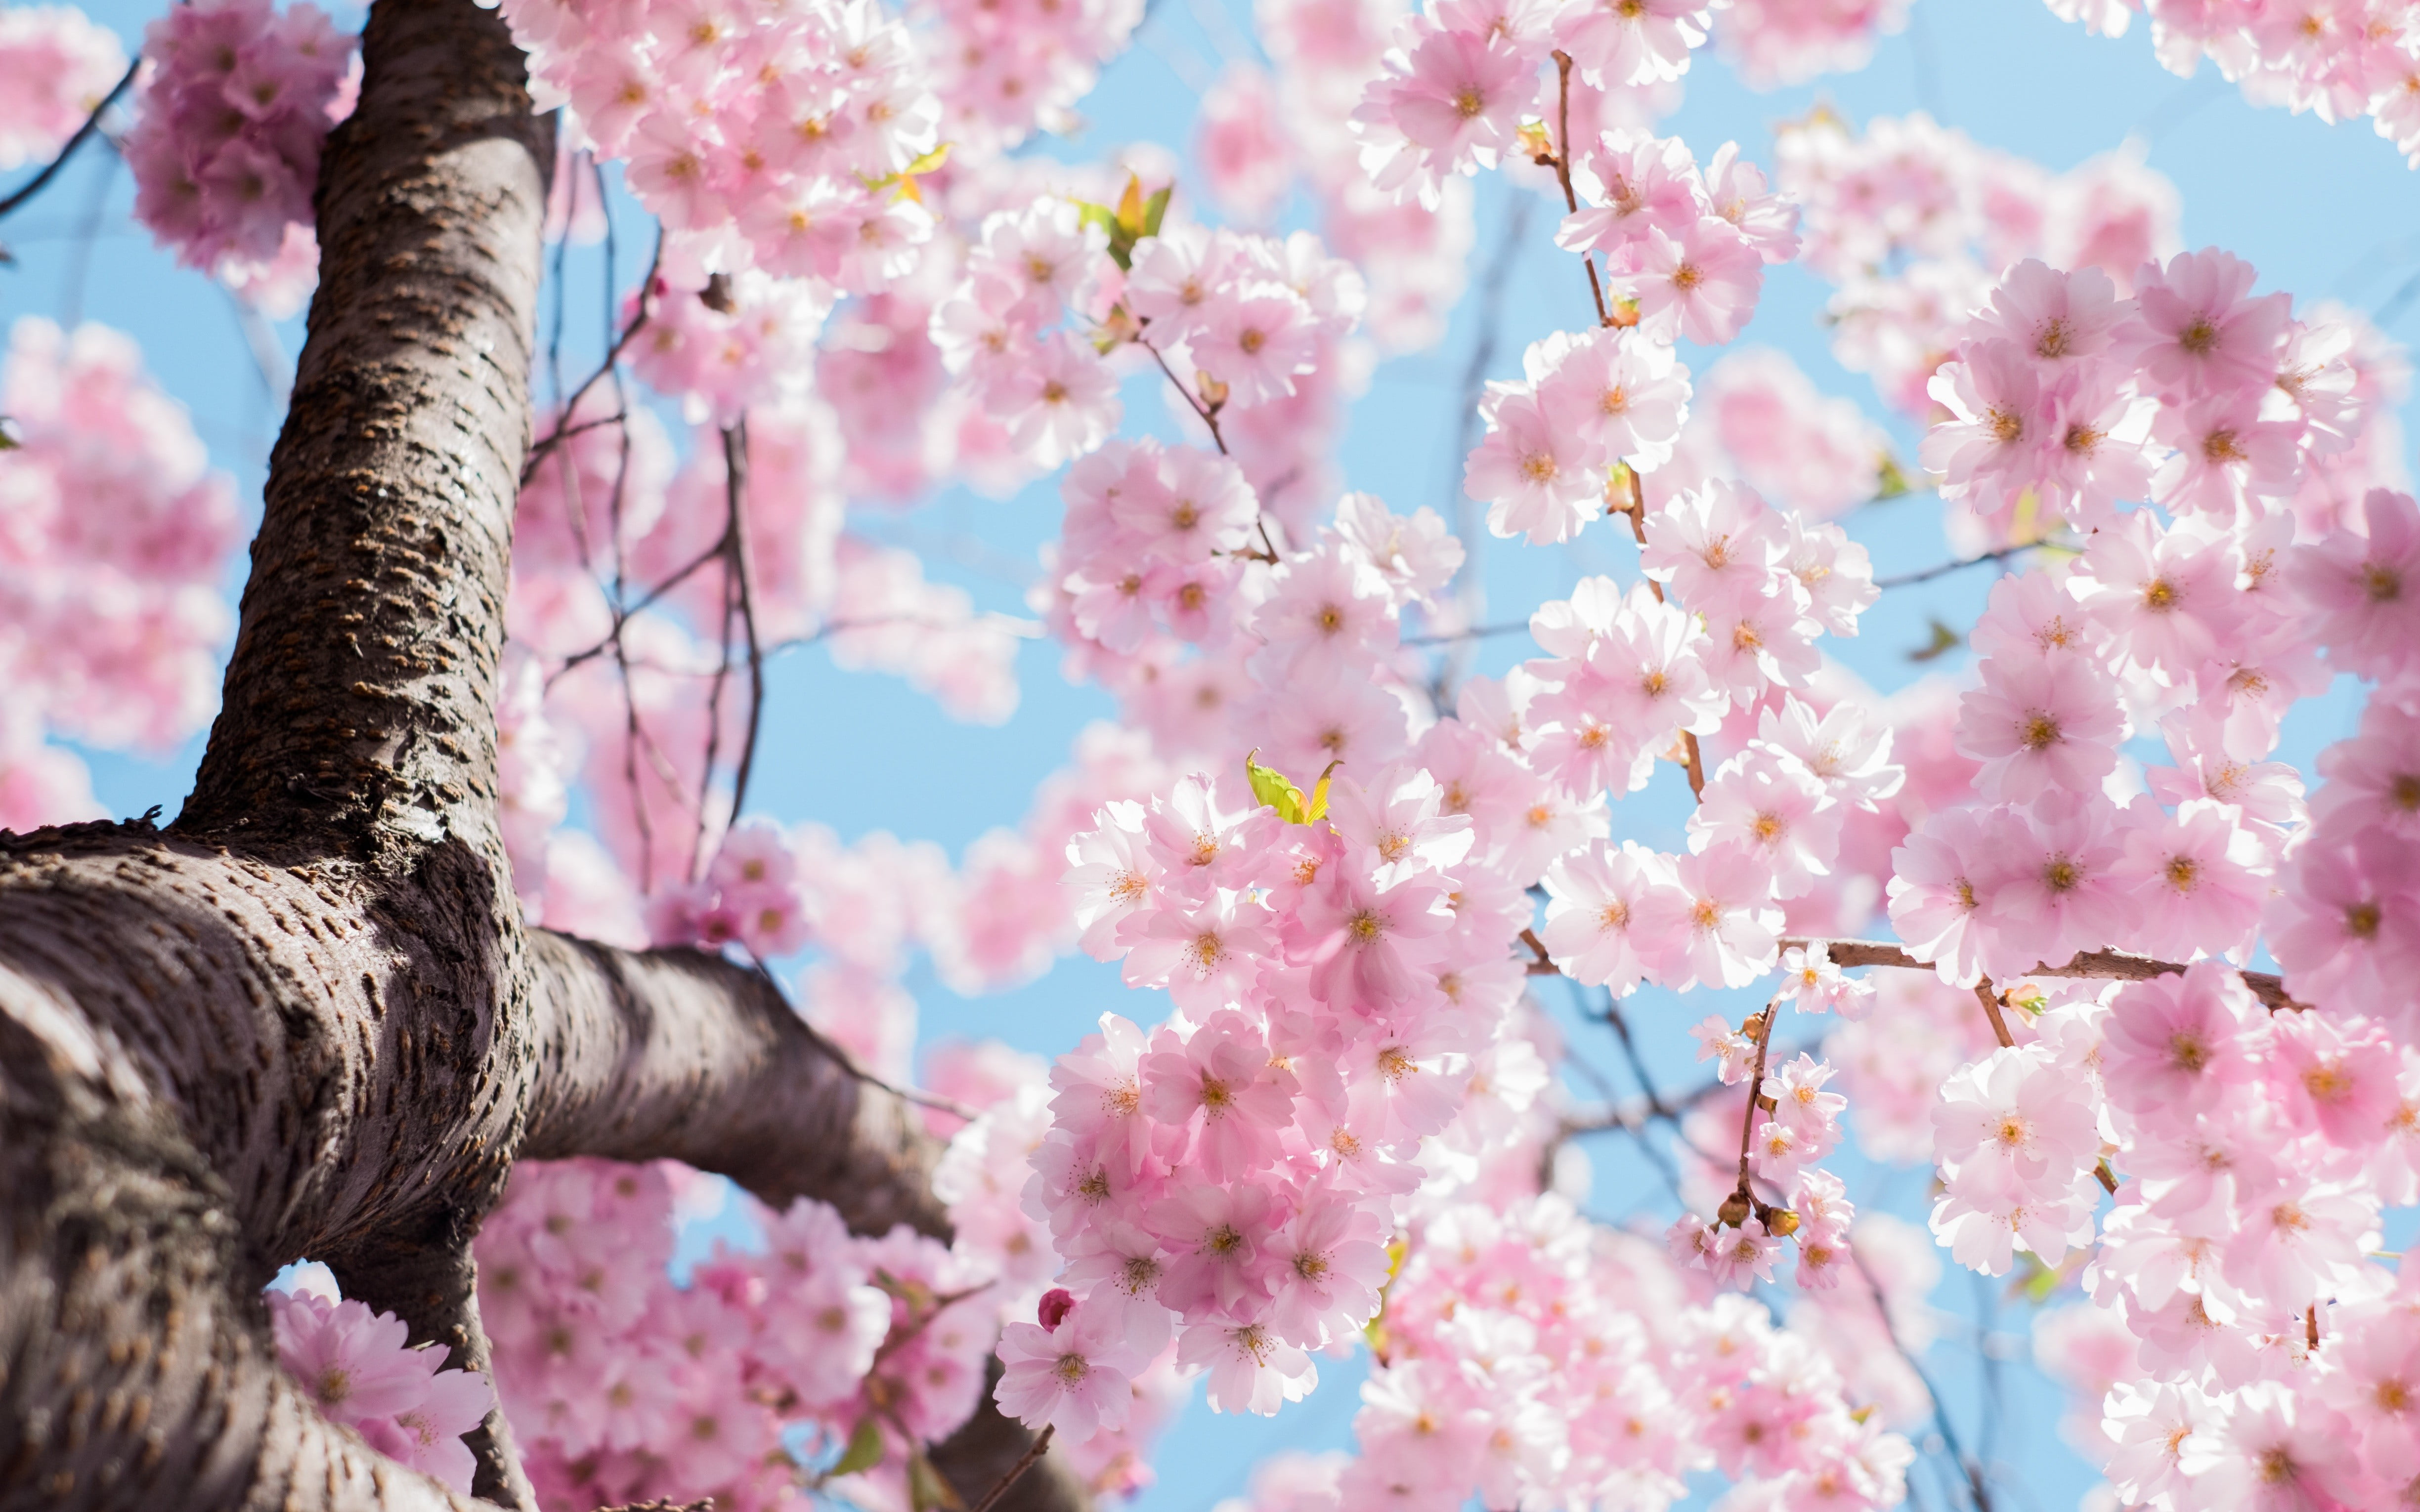 blossom tree, nature, blossoms, pink flowers